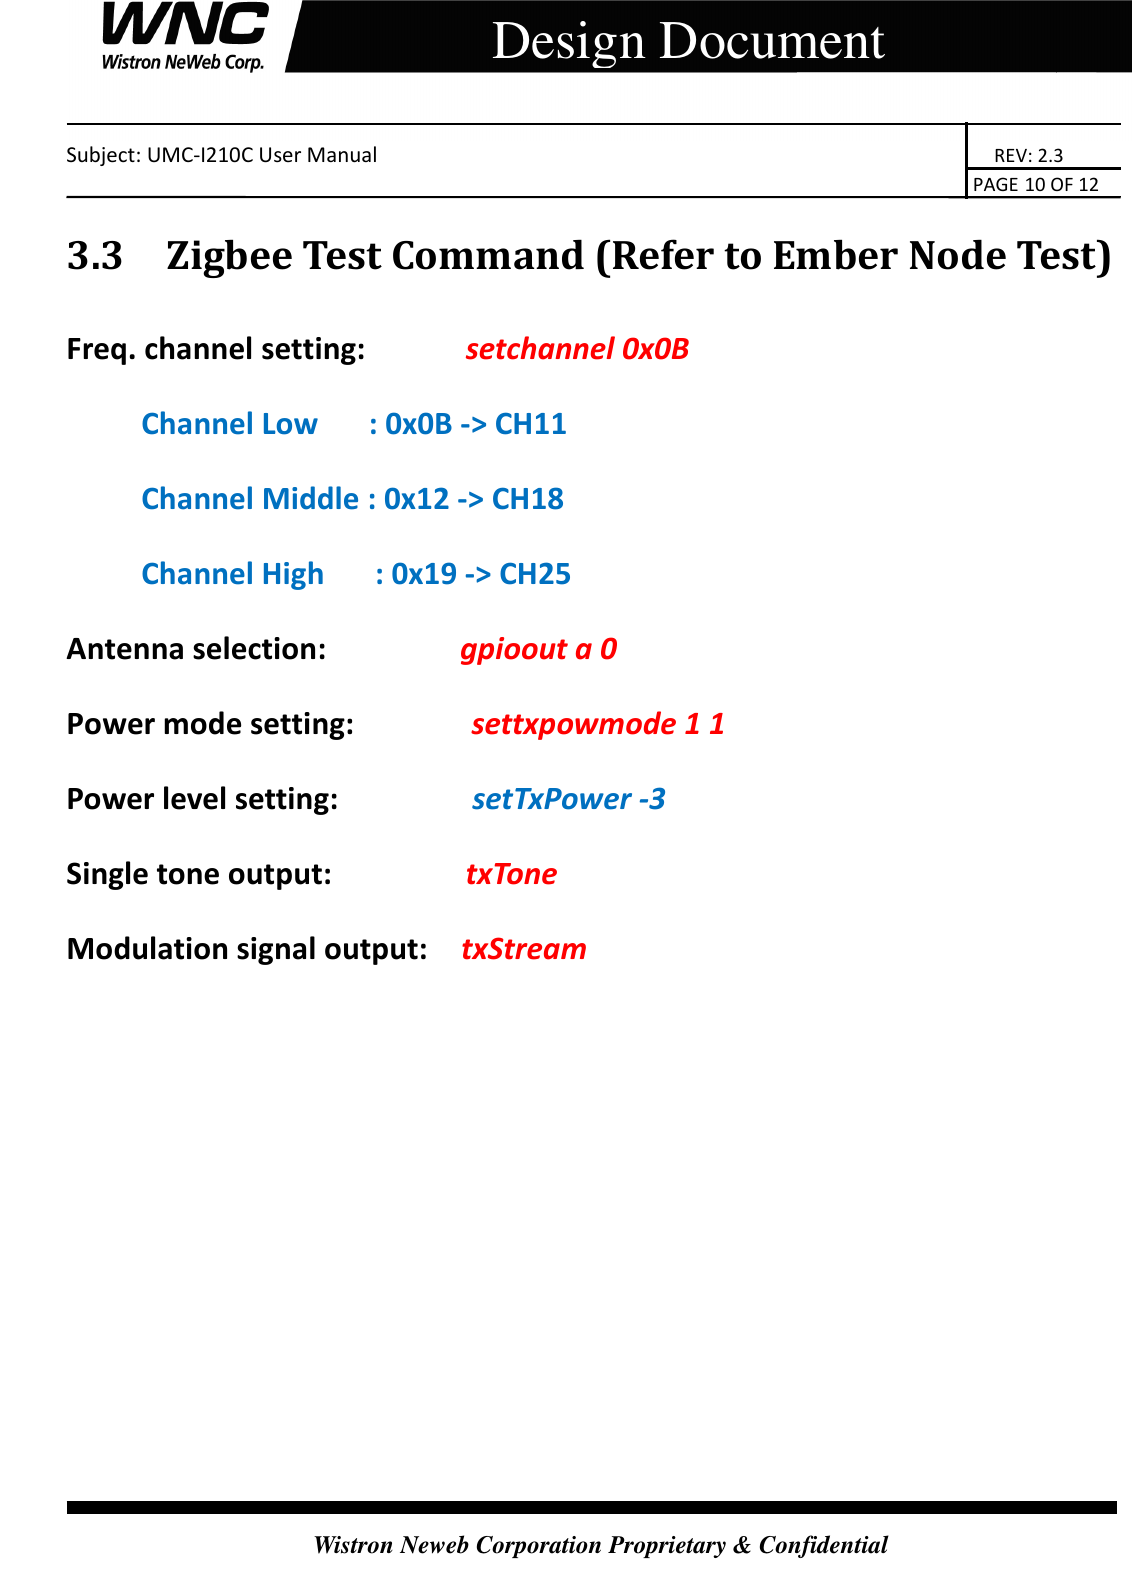    Subject: UMC-I210C User Manual                                                                       REV: 2.3                                                                                                                                                                               PAGE 10 OF 12  Wistron Neweb Corporation Proprietary &amp; Confidential     Design Document 3.3 Zigbee Test Command (Refer to Ember Node Test) Freq. channel setting:            setchannel 0x0B Channel Low      : 0x0B -&gt; CH11   Channel Middle : 0x12 -&gt; CH18   Channel High      : 0x19 -&gt; CH25 Antenna selection:                gpioout a 0 Power mode setting:              settxpowmode 1 1 Power level setting:                setTxPower -3 Single tone output:                txTone Modulation signal output:    txStream 